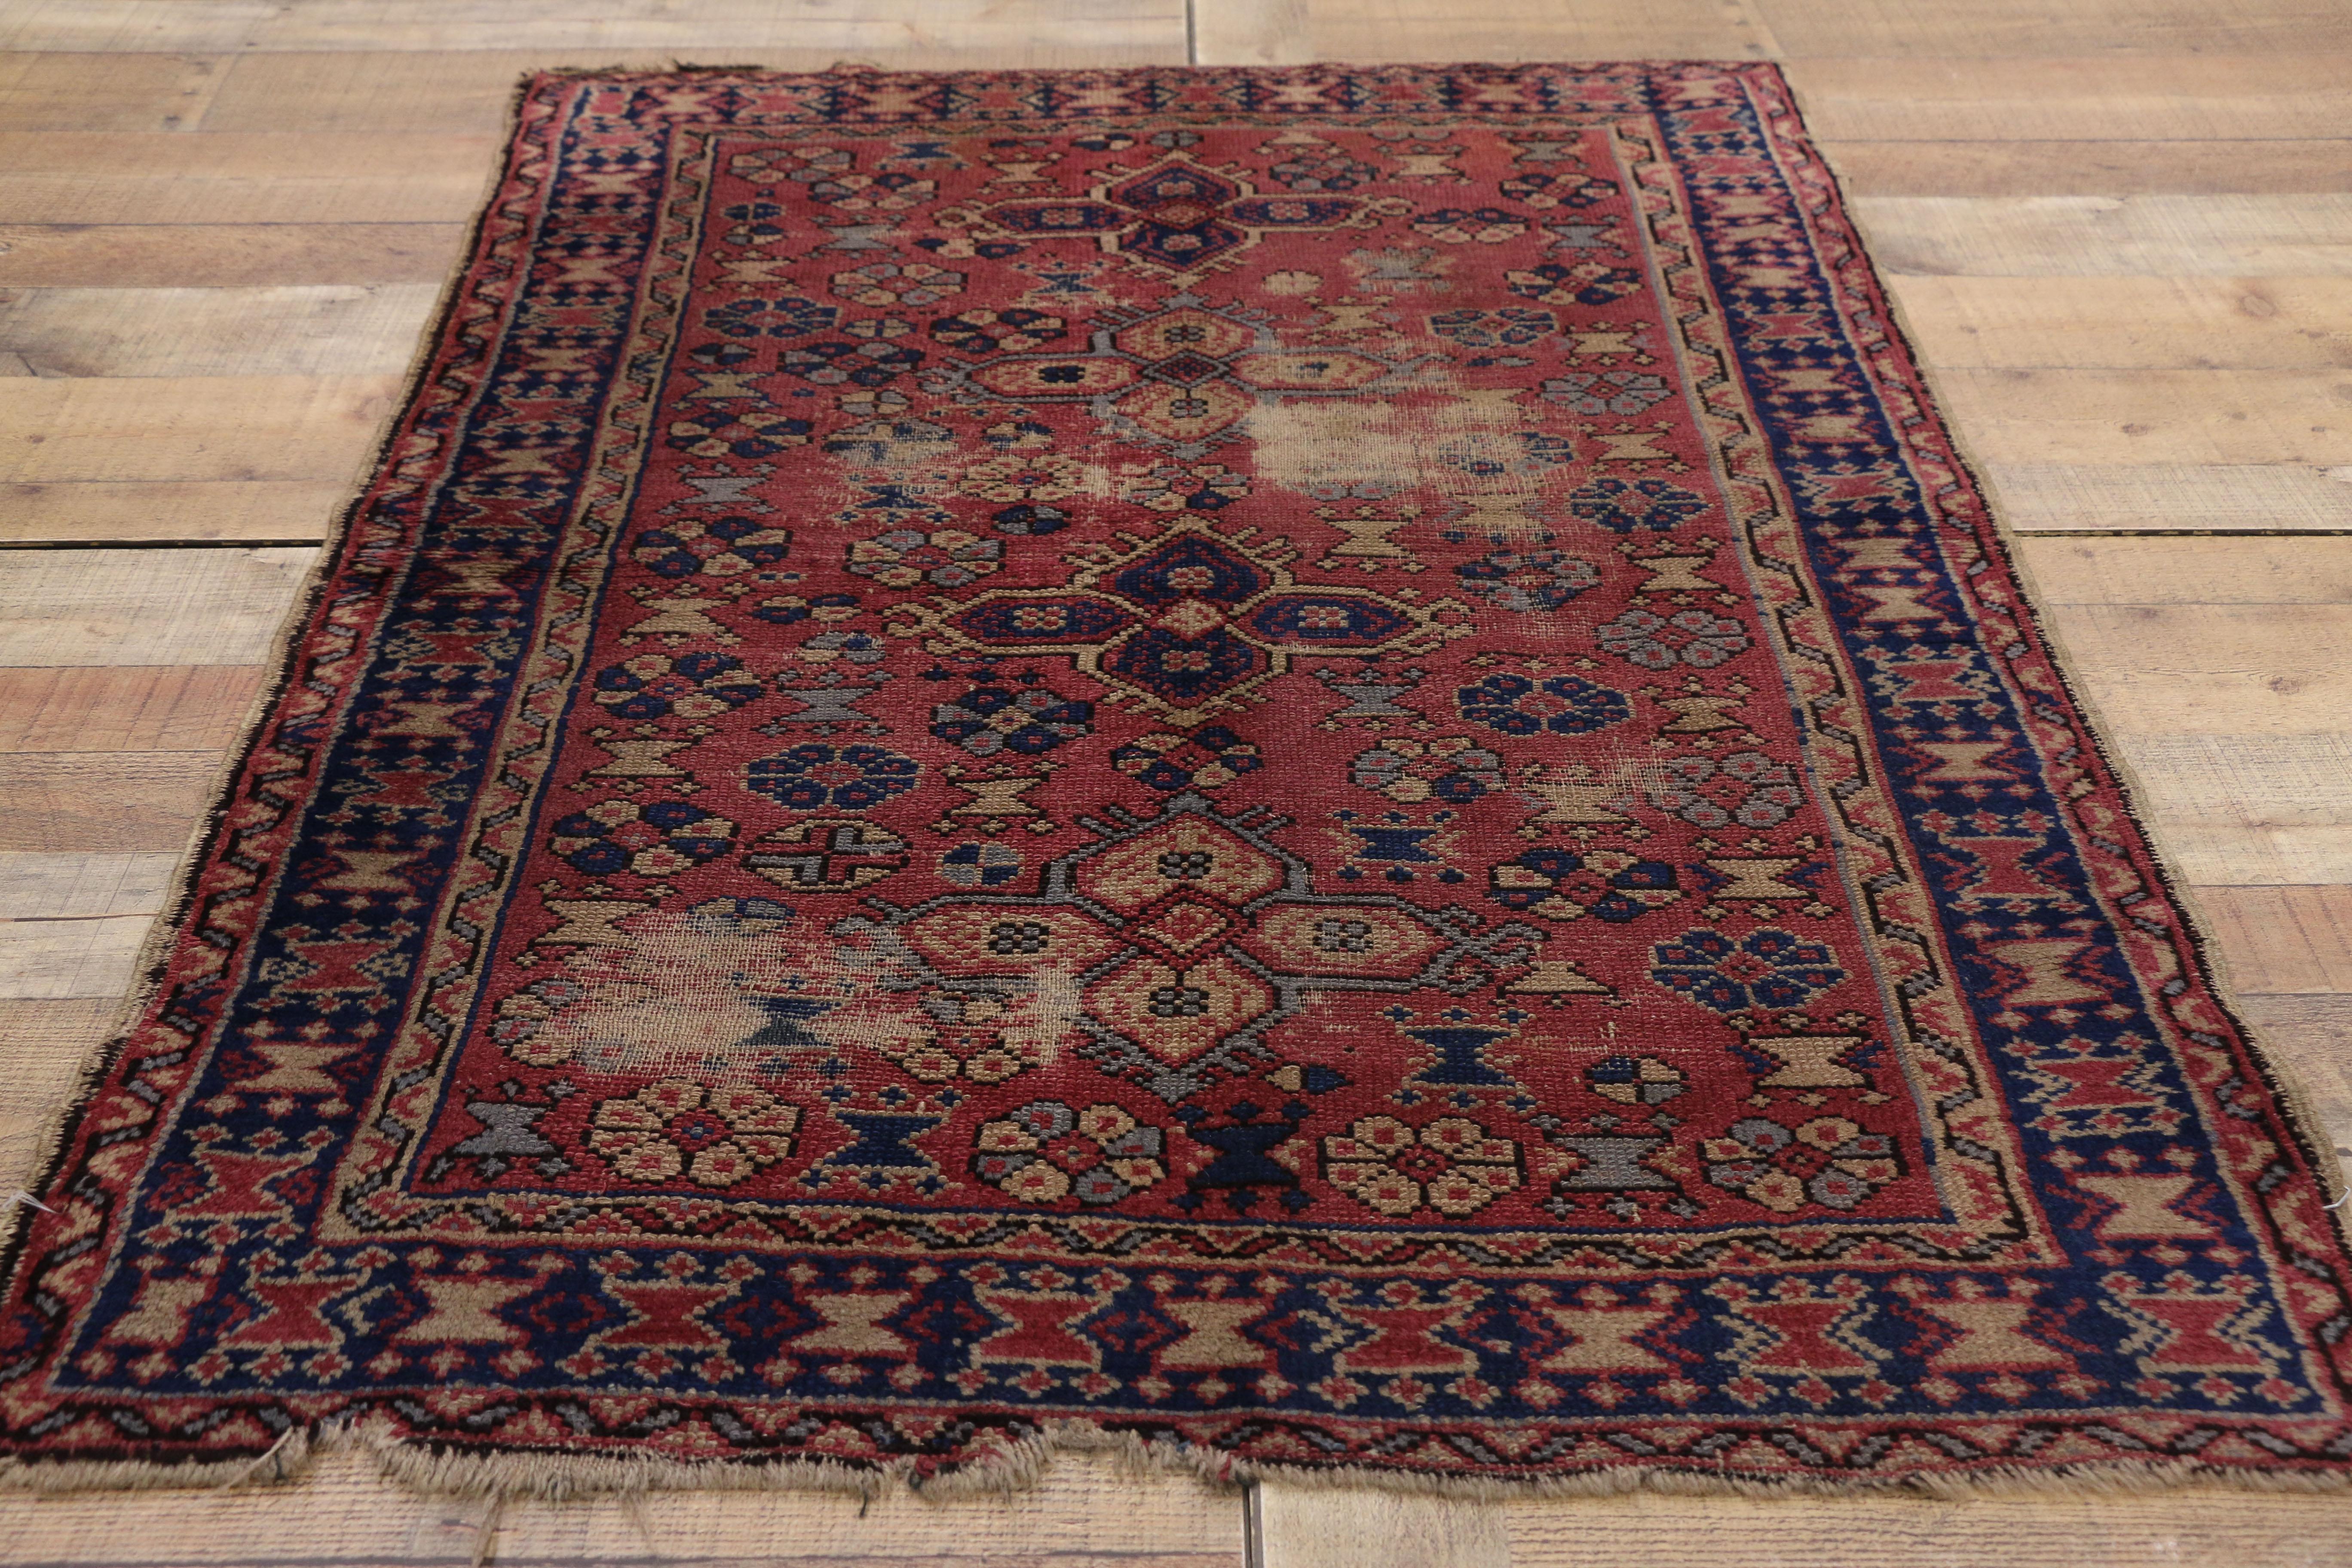 Distressed Antique Turkish Sparta Rug with Industrial Rustic Artisan Style 7